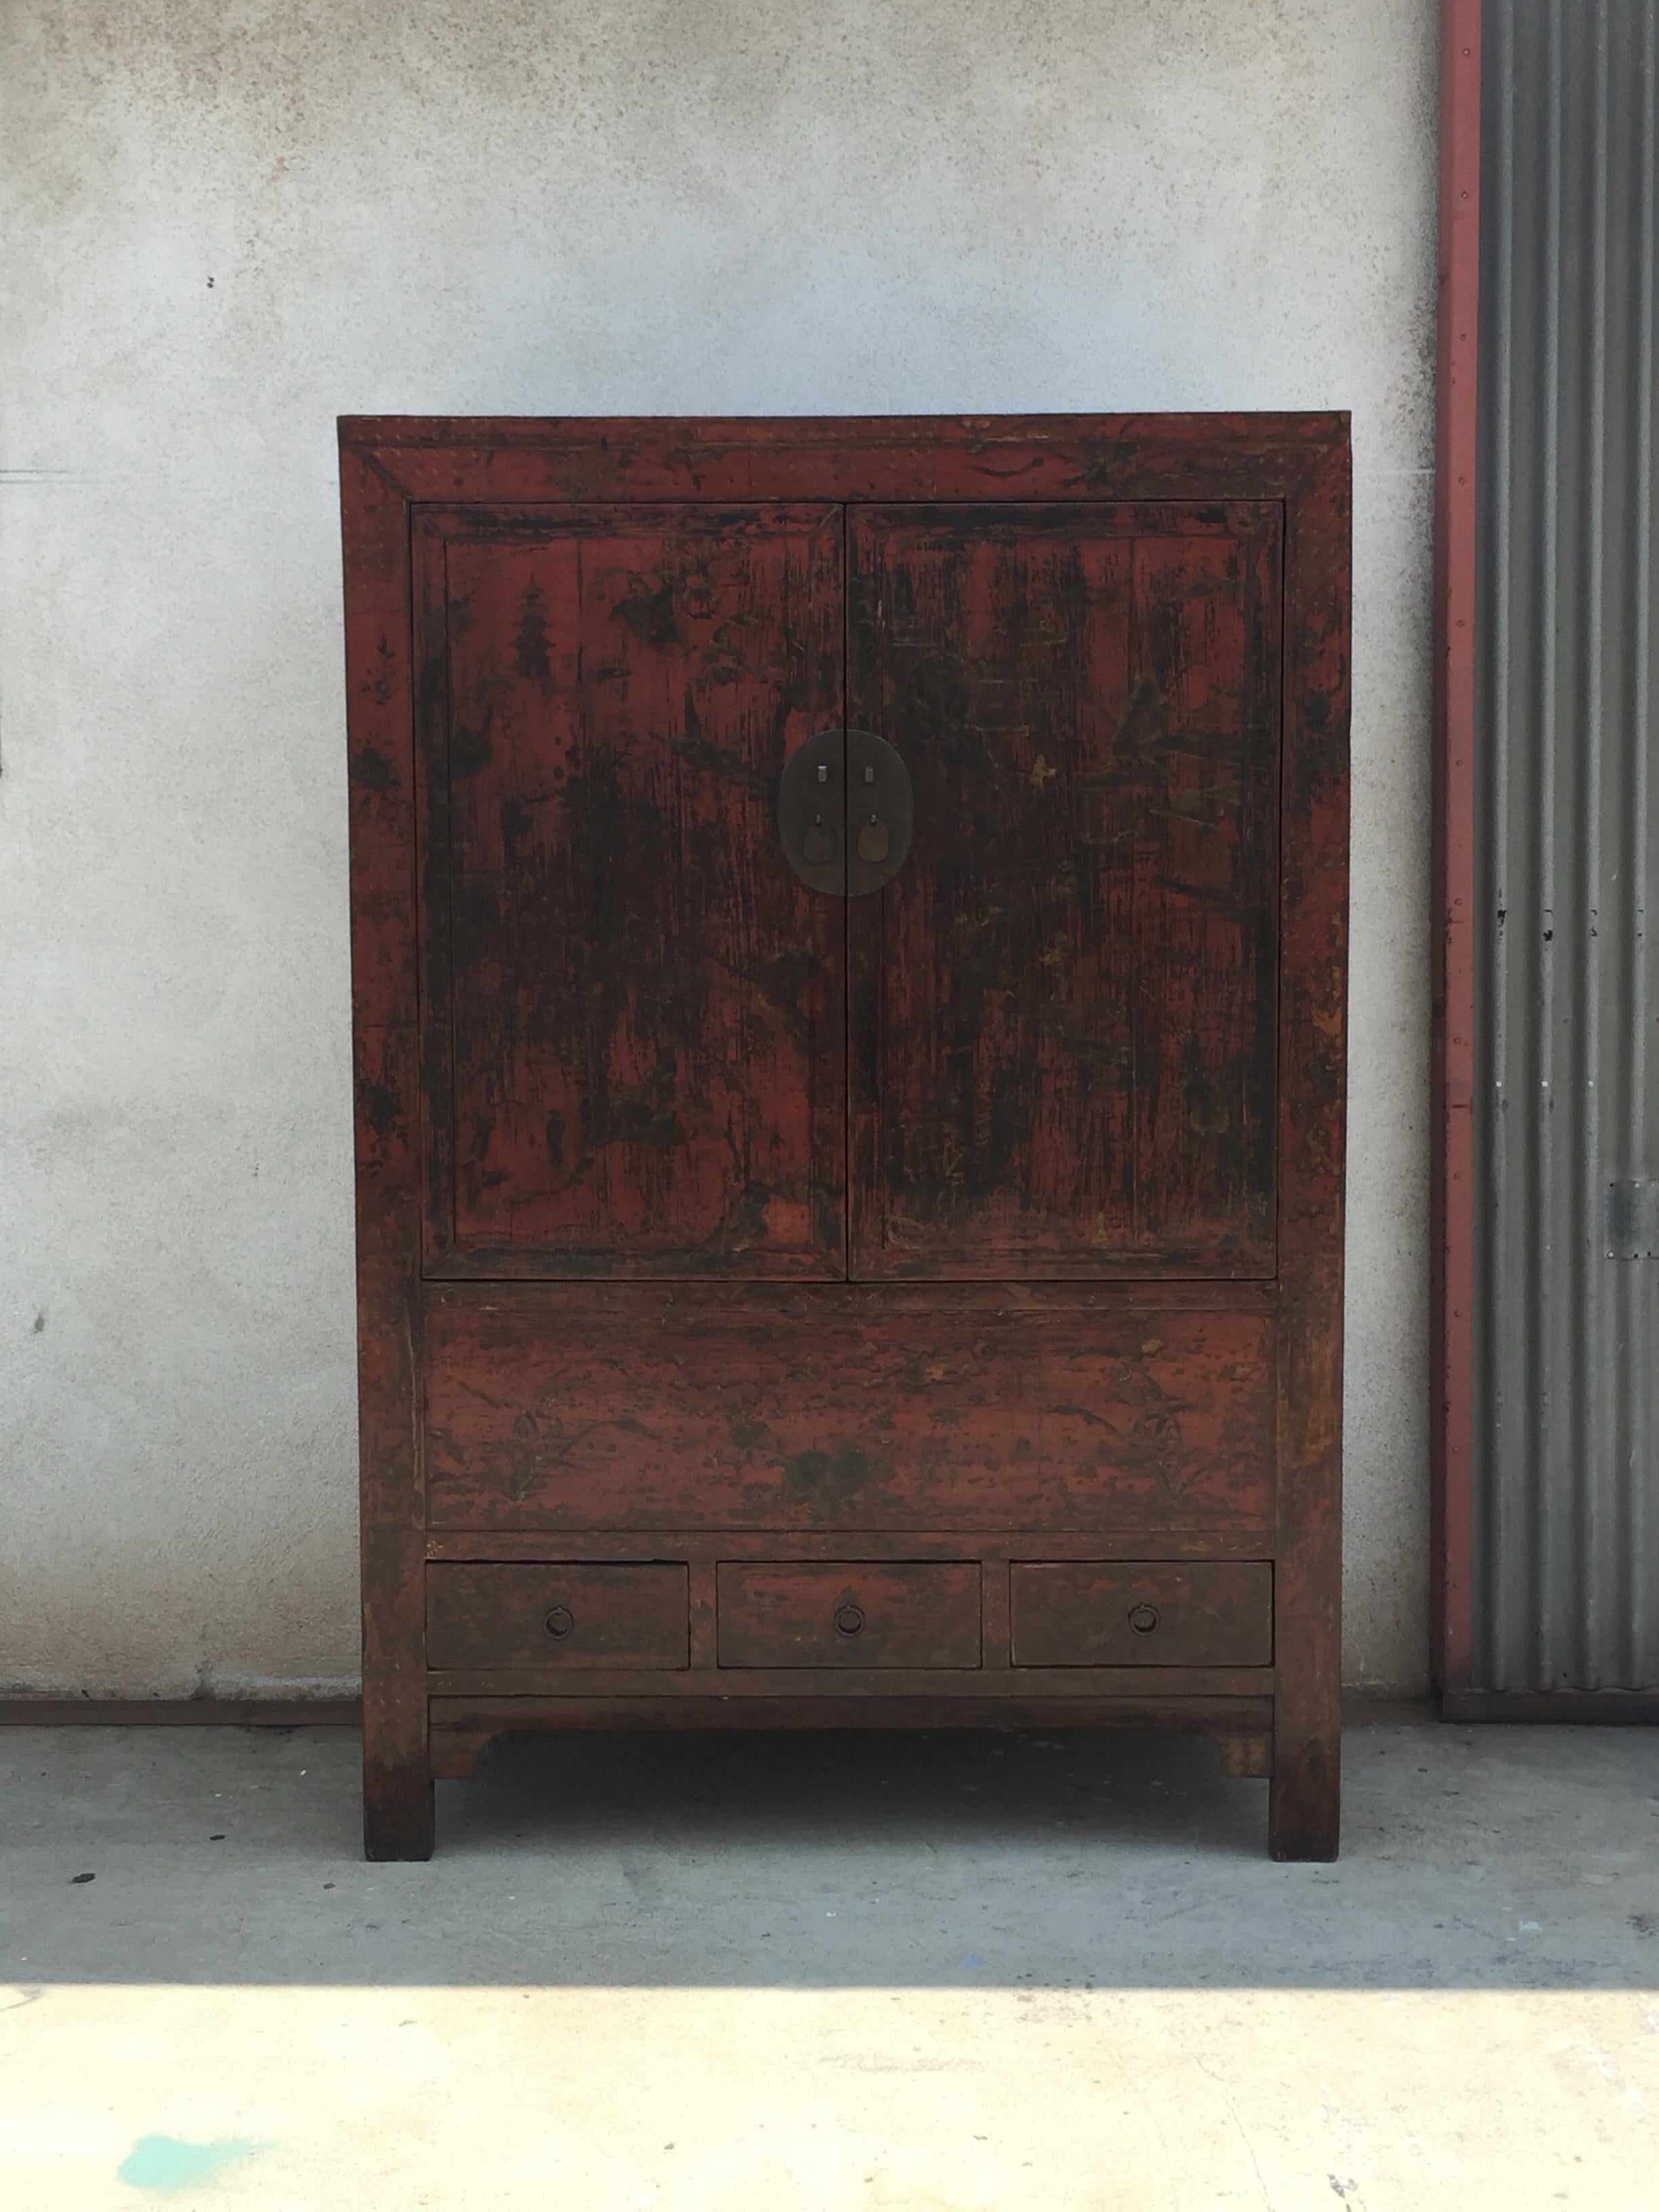 Unique Chinese lacquer cabinet from the original Spago restaurant on Sunset Boulevard in Los Angeles, currently being remodeled. Patinated bronze hardware.